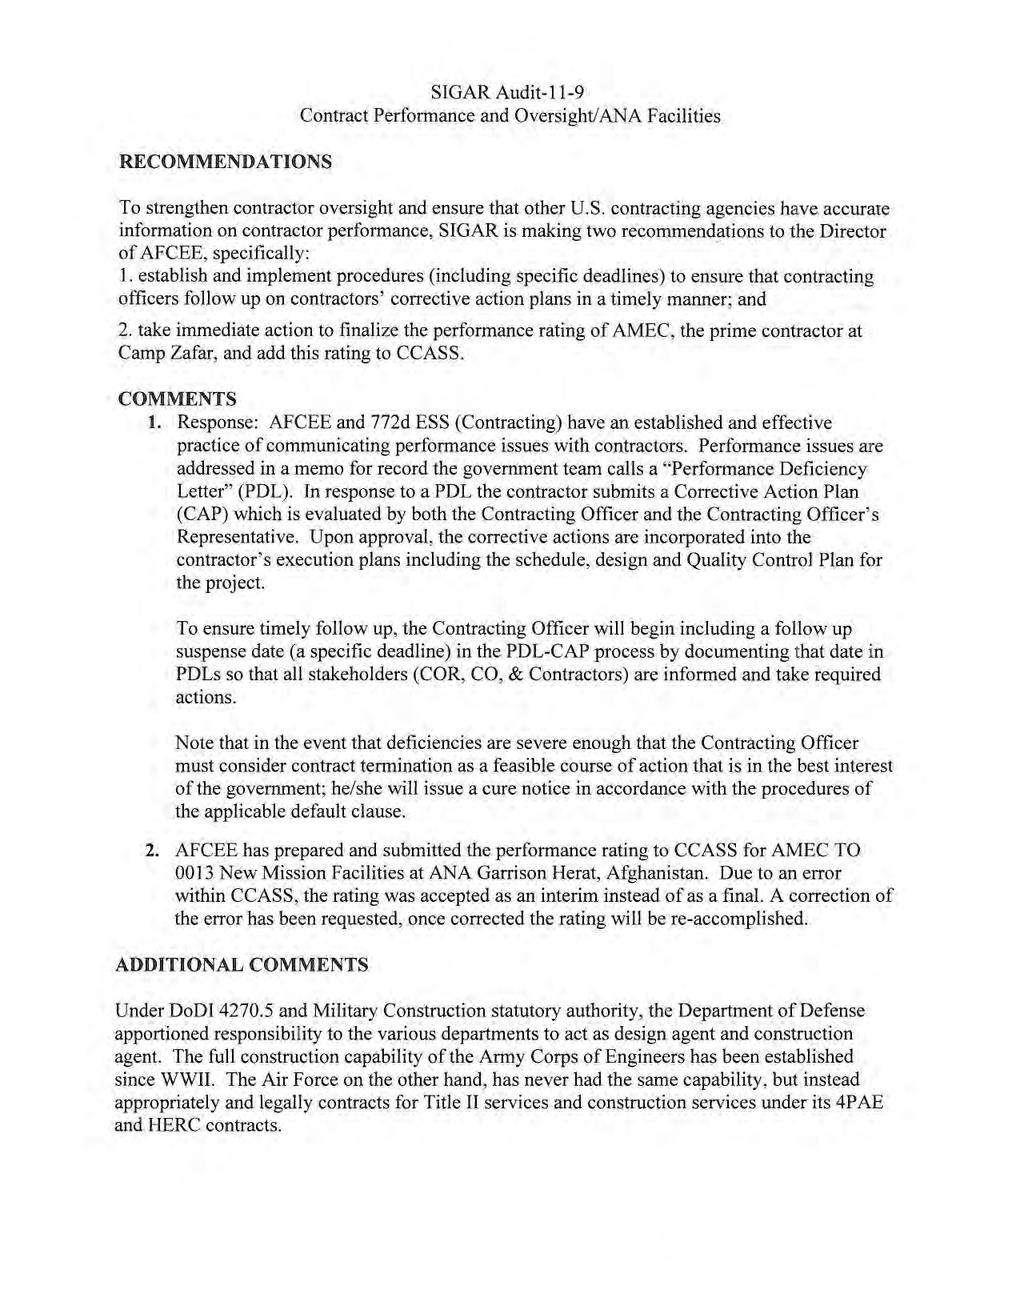 RECOMMENDATIONS SIGAR Audit-11-9 Contract Performance and Oversight/ANA Facilities To stren!,>1hen contractor oversight and ensure that other U.S. contracting agencies have accurate information on contractor performance, SIGAR is making two recommendations to the Director of AFCEE, specifically: 1.